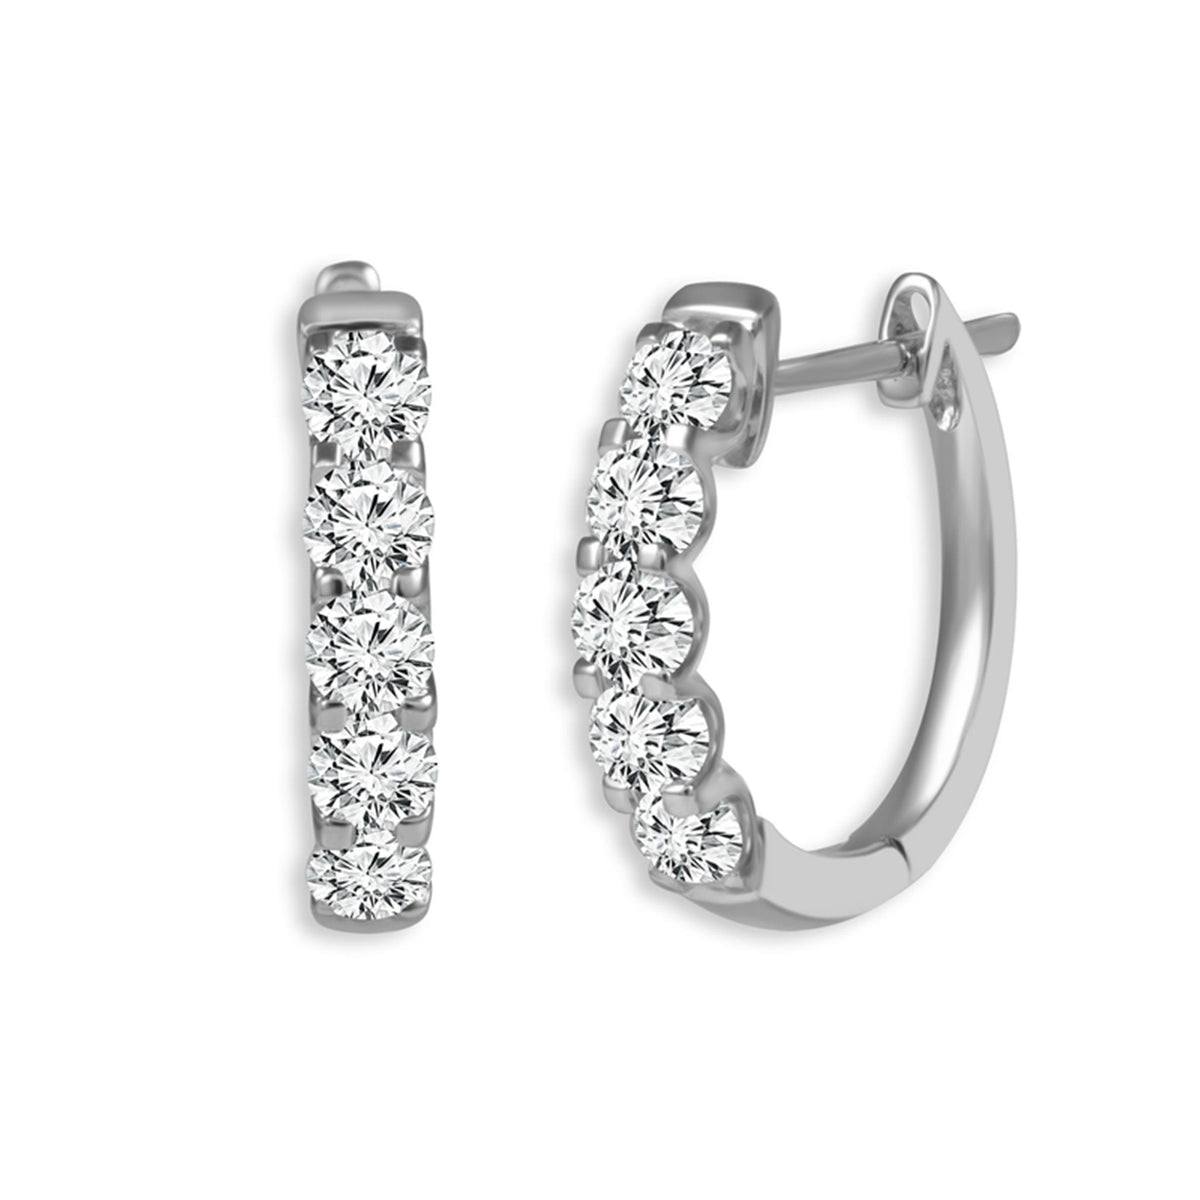 14Kt White Gold Oval Hoop Earrings With 1.95cttw Natural Diamonds